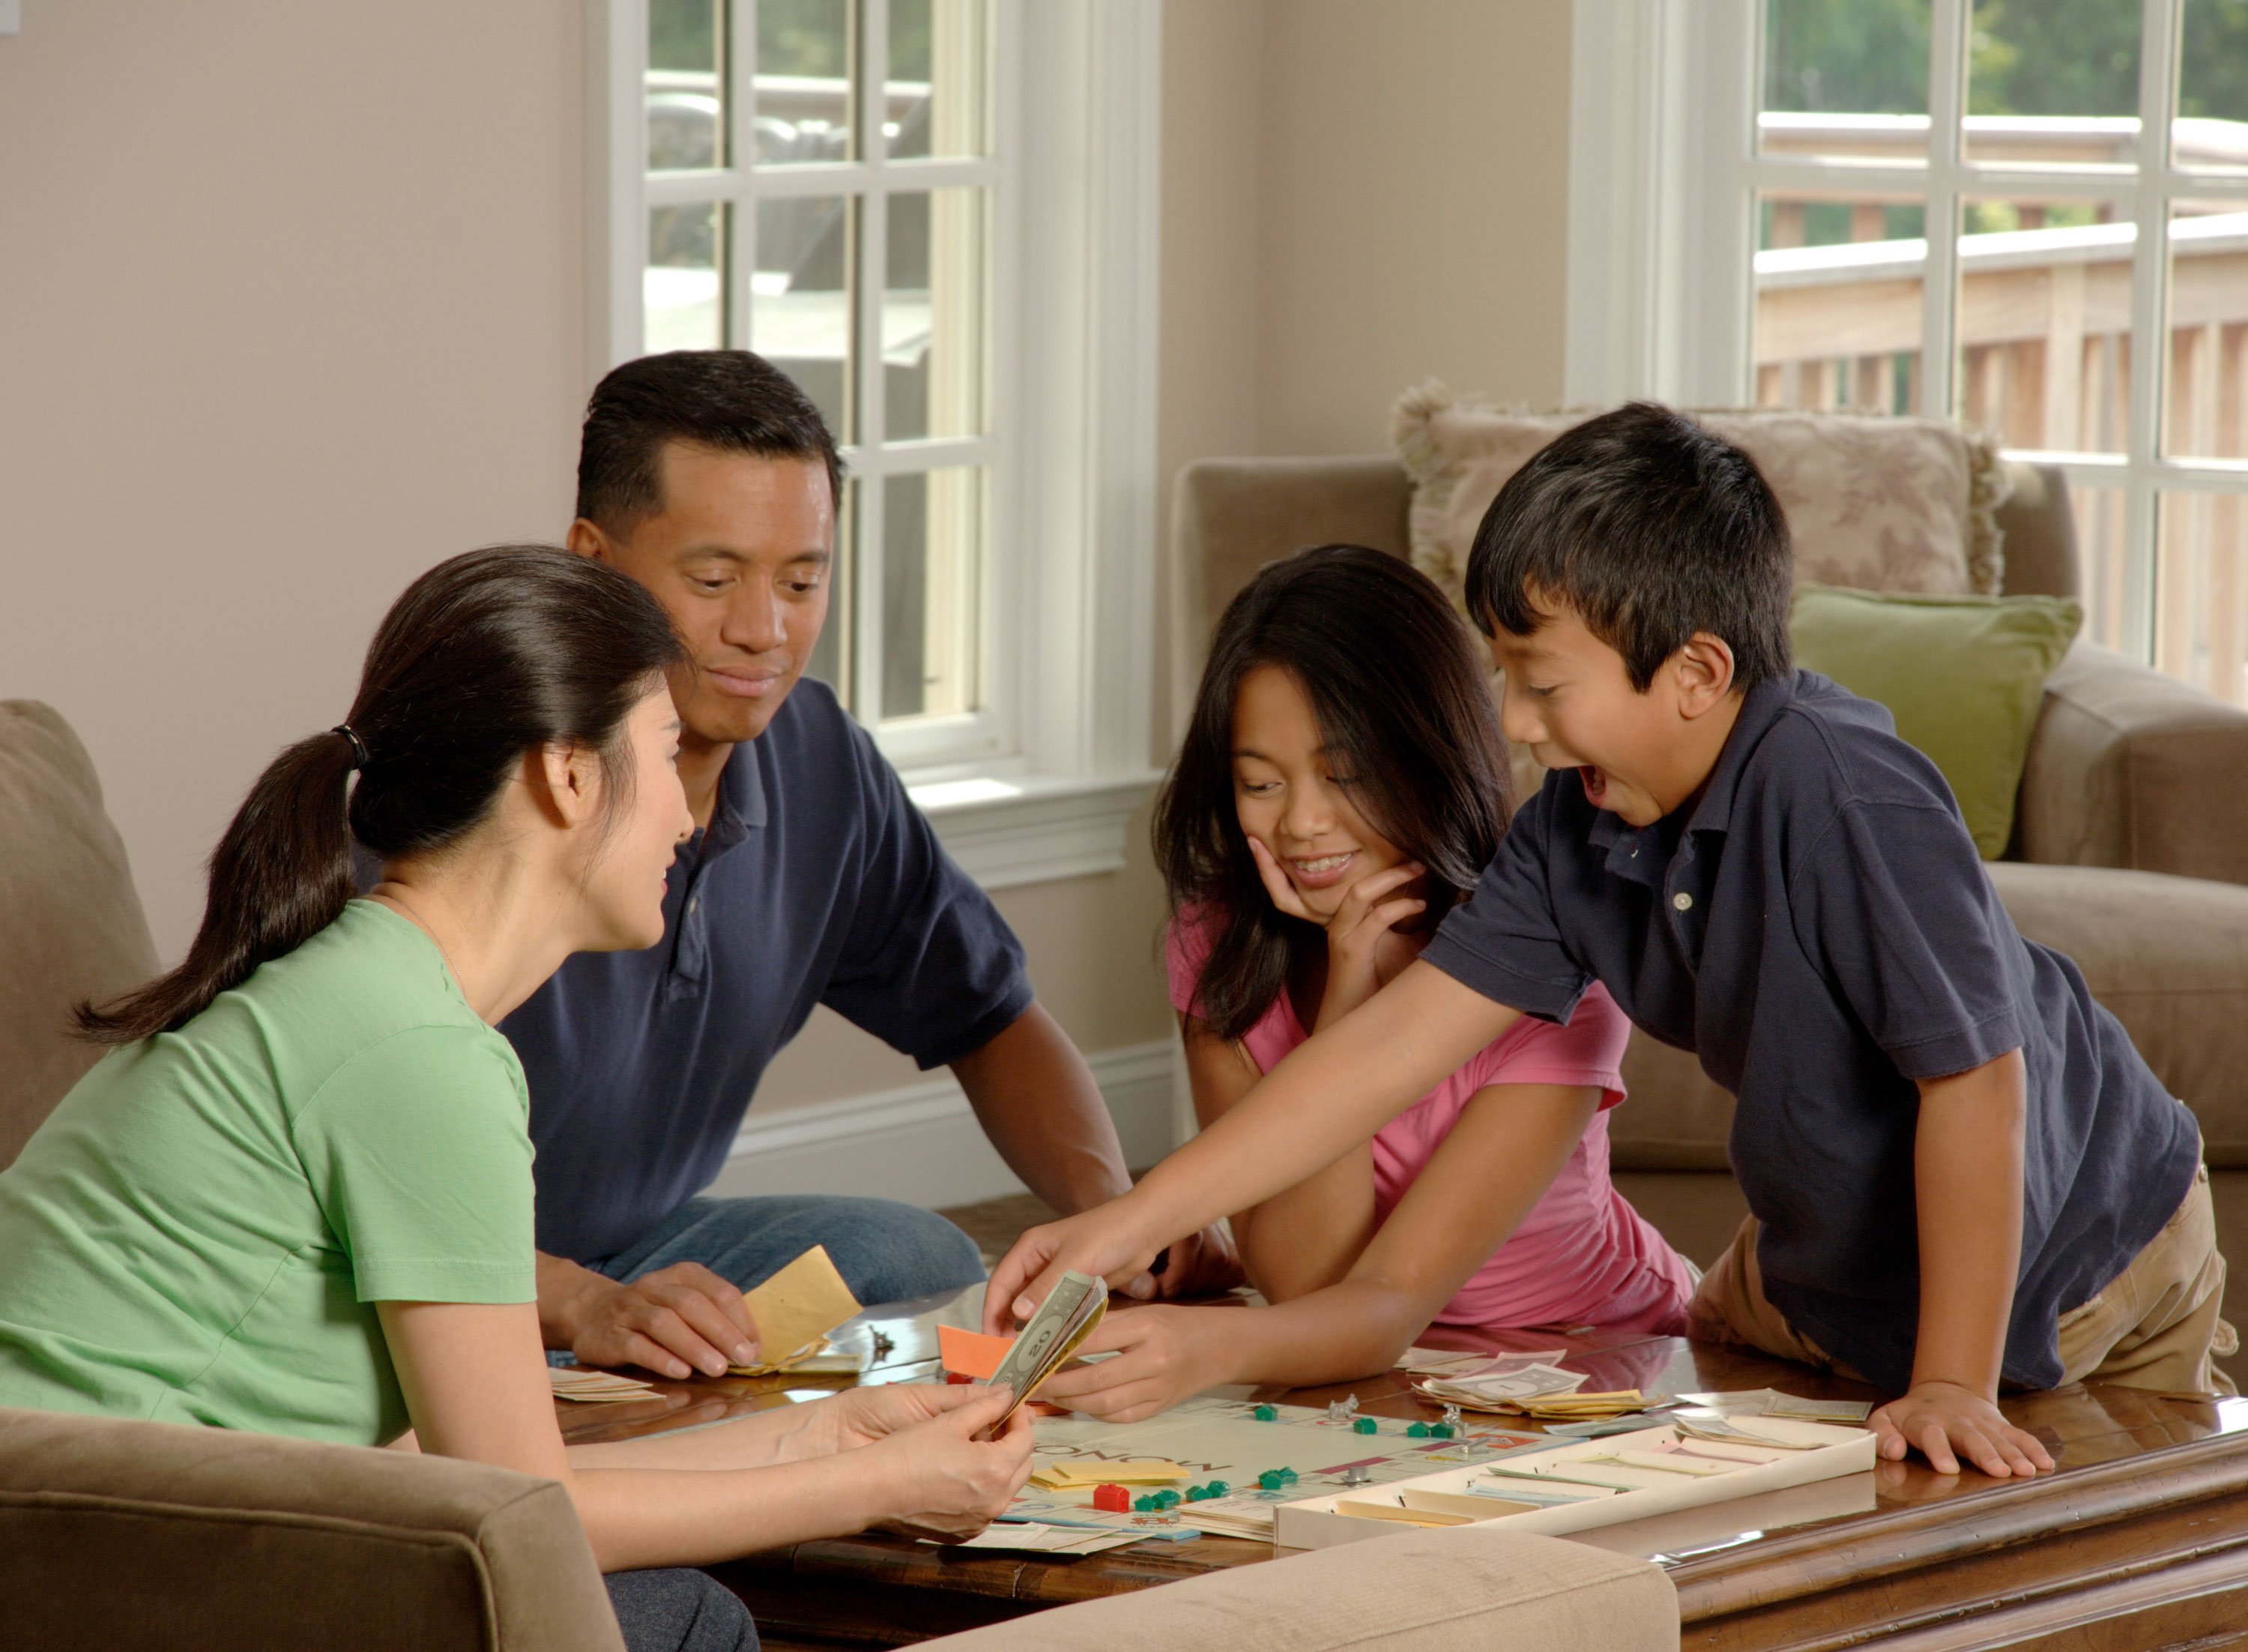 File:Family playing a board game (3).jpg - Wikimedia Commons